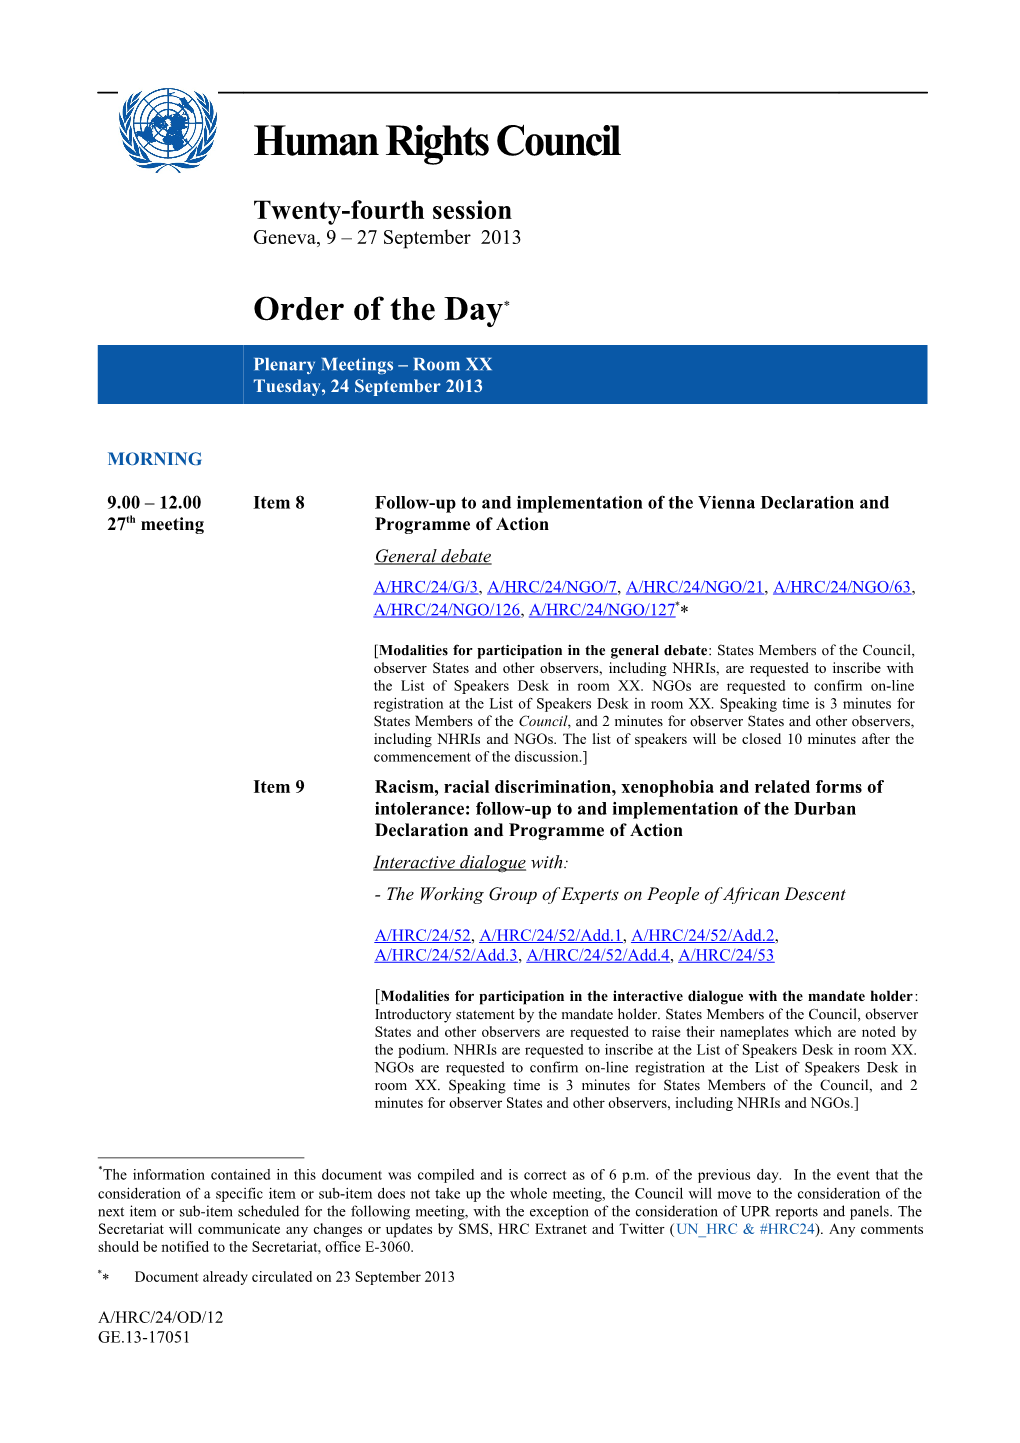 Order of the Day, Tuesday, 24 September 2013 (Word)